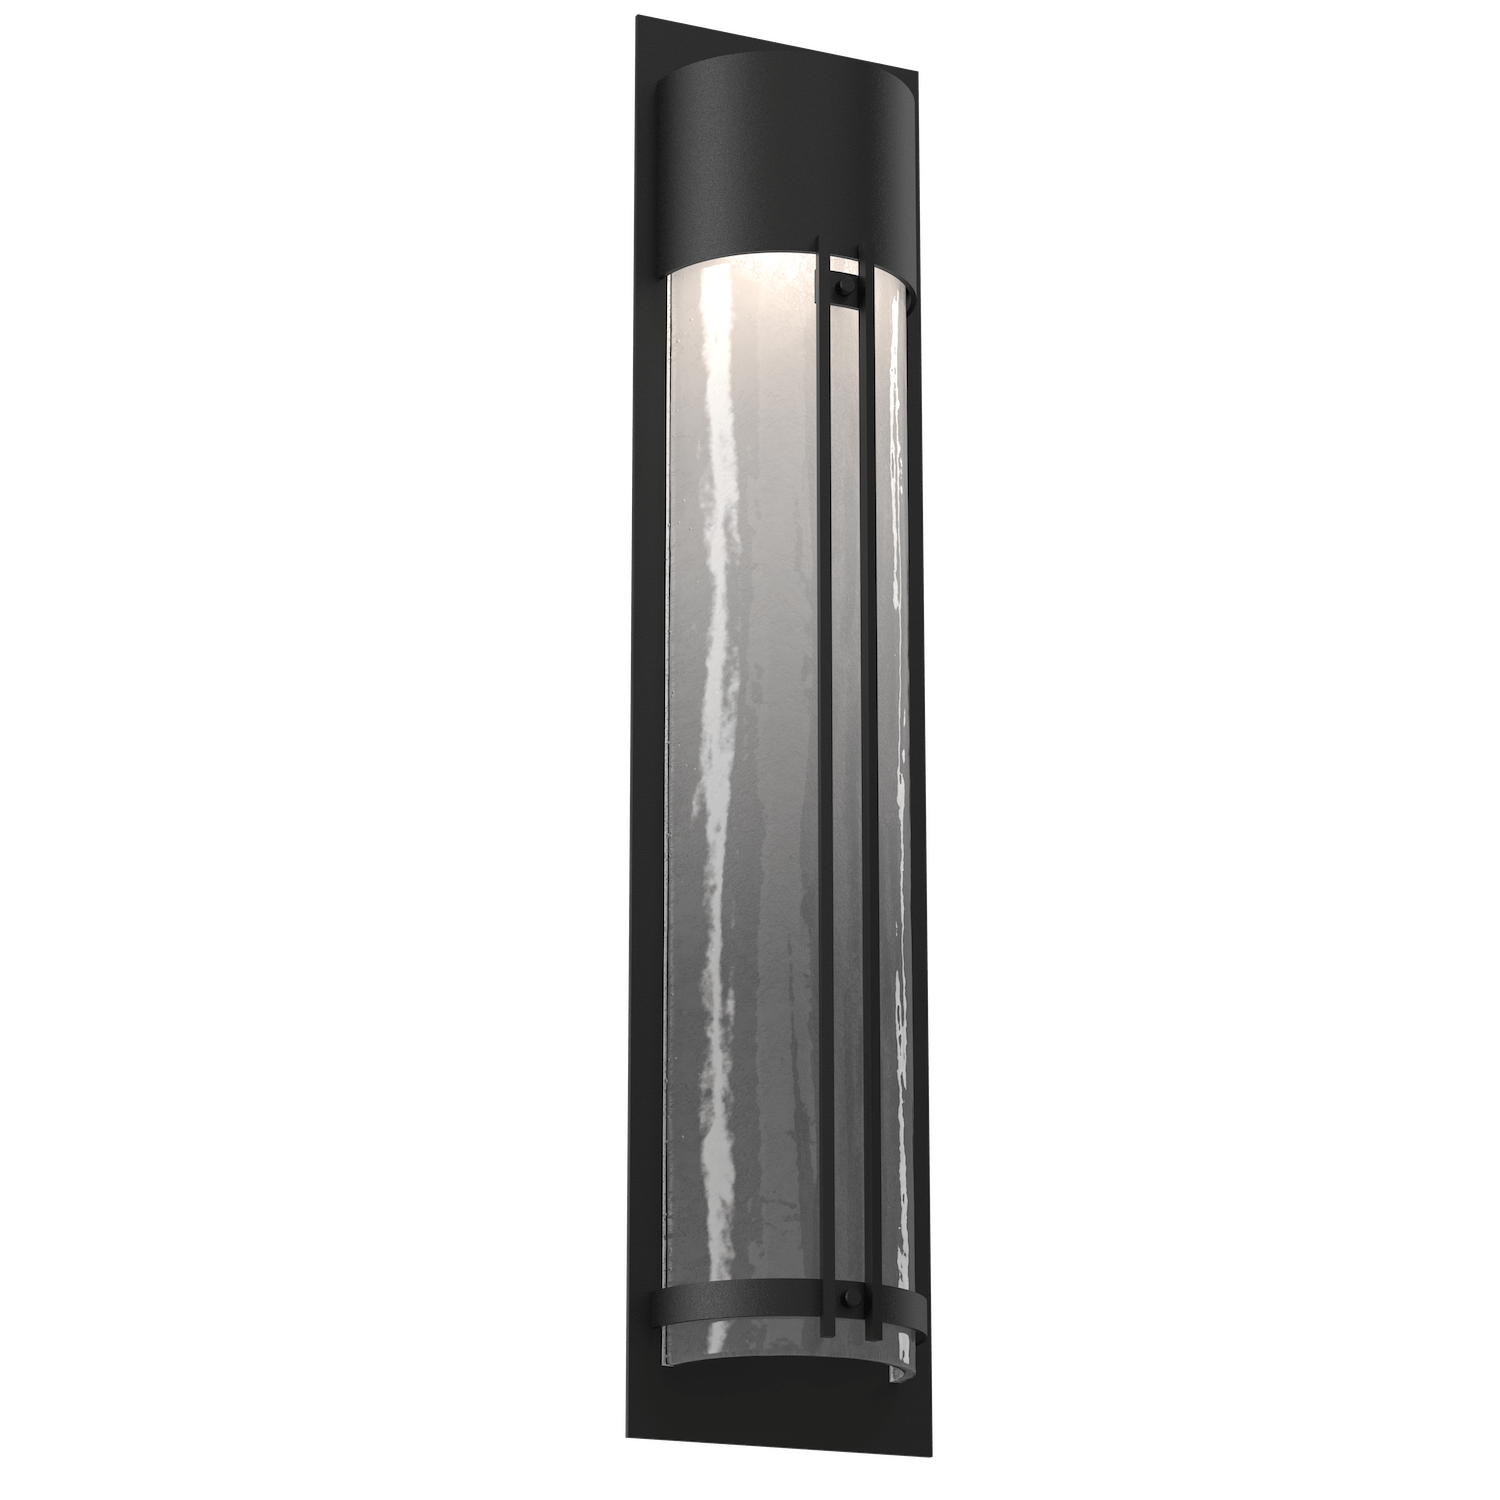 Hammerton Studio Half Round Cover Sconce Outdoor l Wall Hammerton Studio 31 Textured Black (Outdoor) Frosted Granite